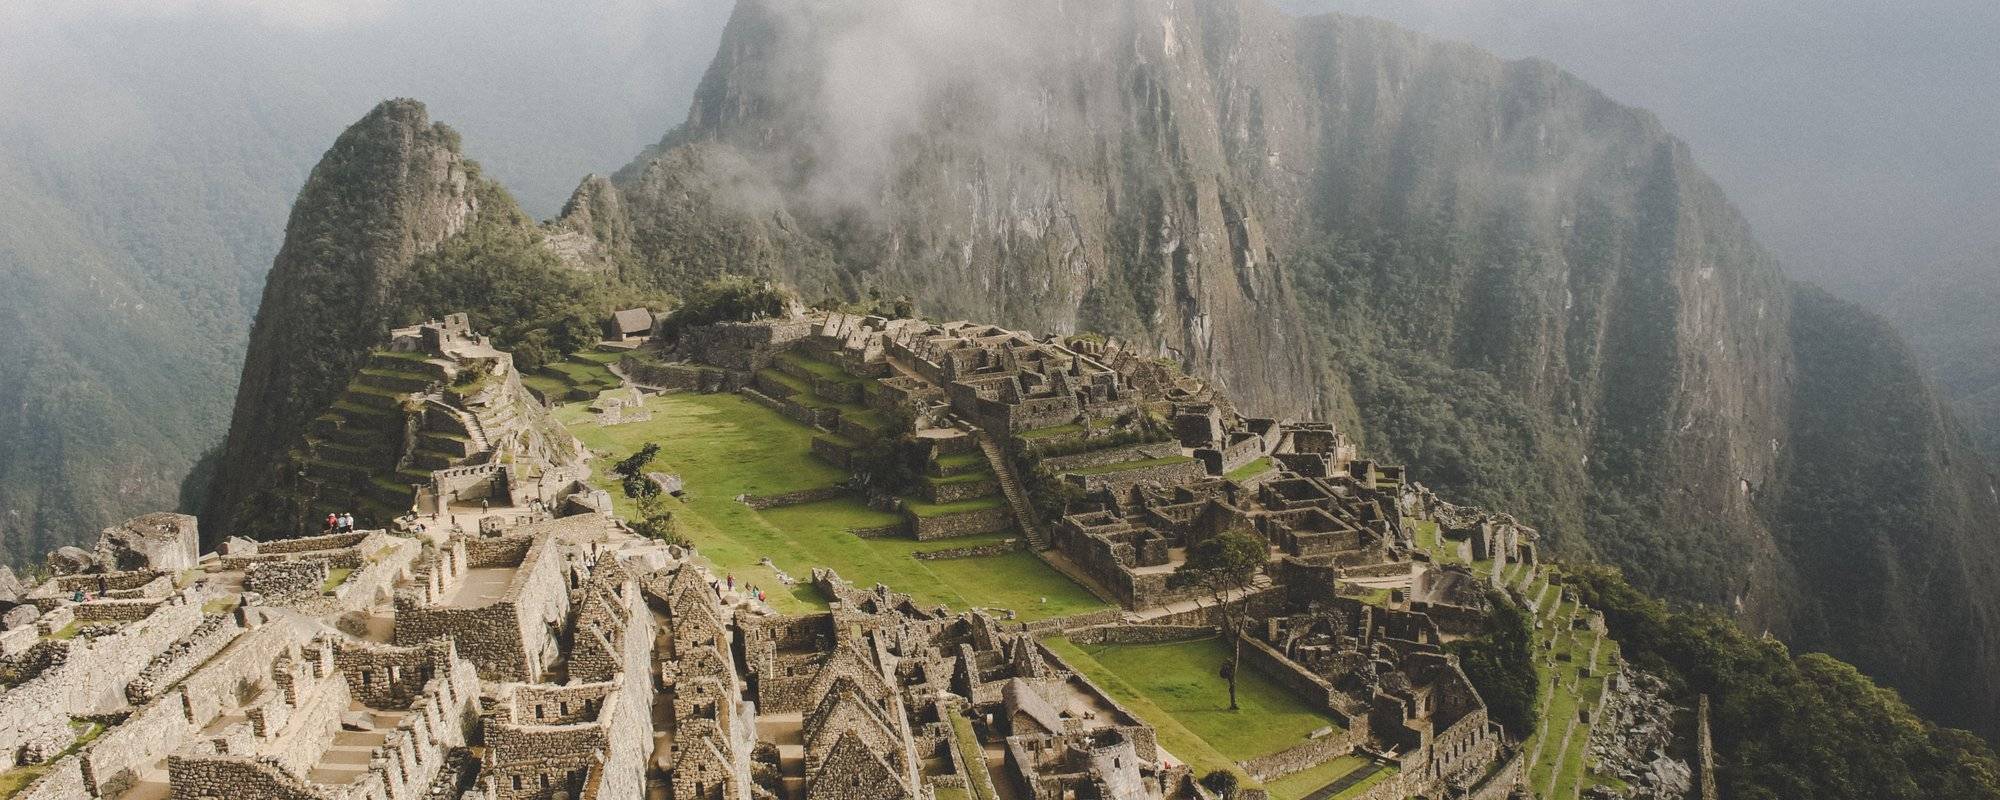 My Experience at Machu Picchu_The Lost City of the Incas